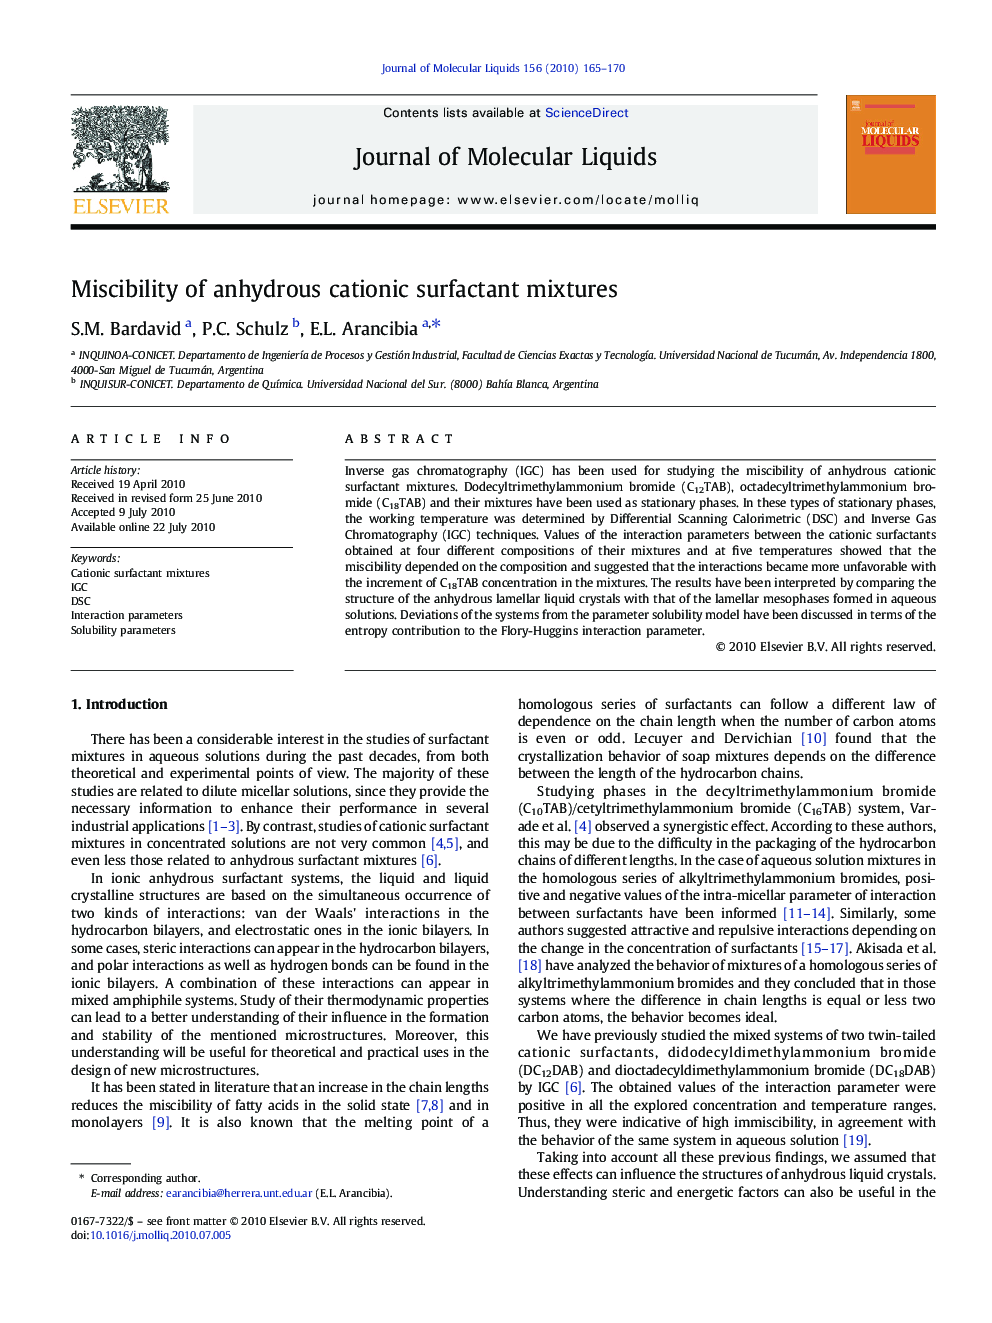 Miscibility of anhydrous cationic surfactant mixtures